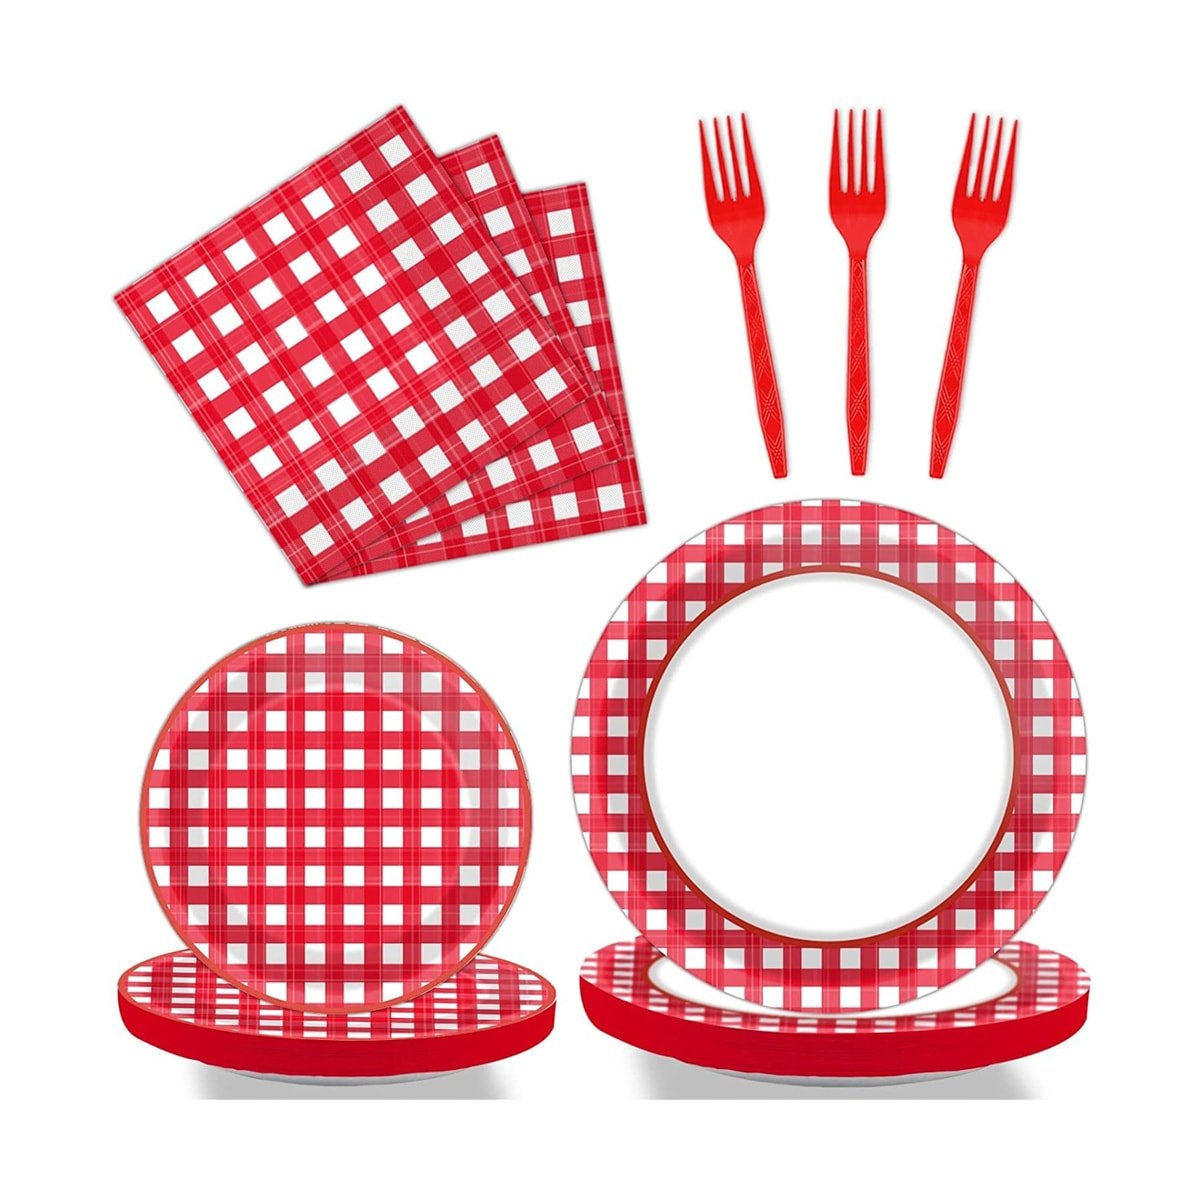 A set of red and white checkered napkins and paper plates and red plastic forks.